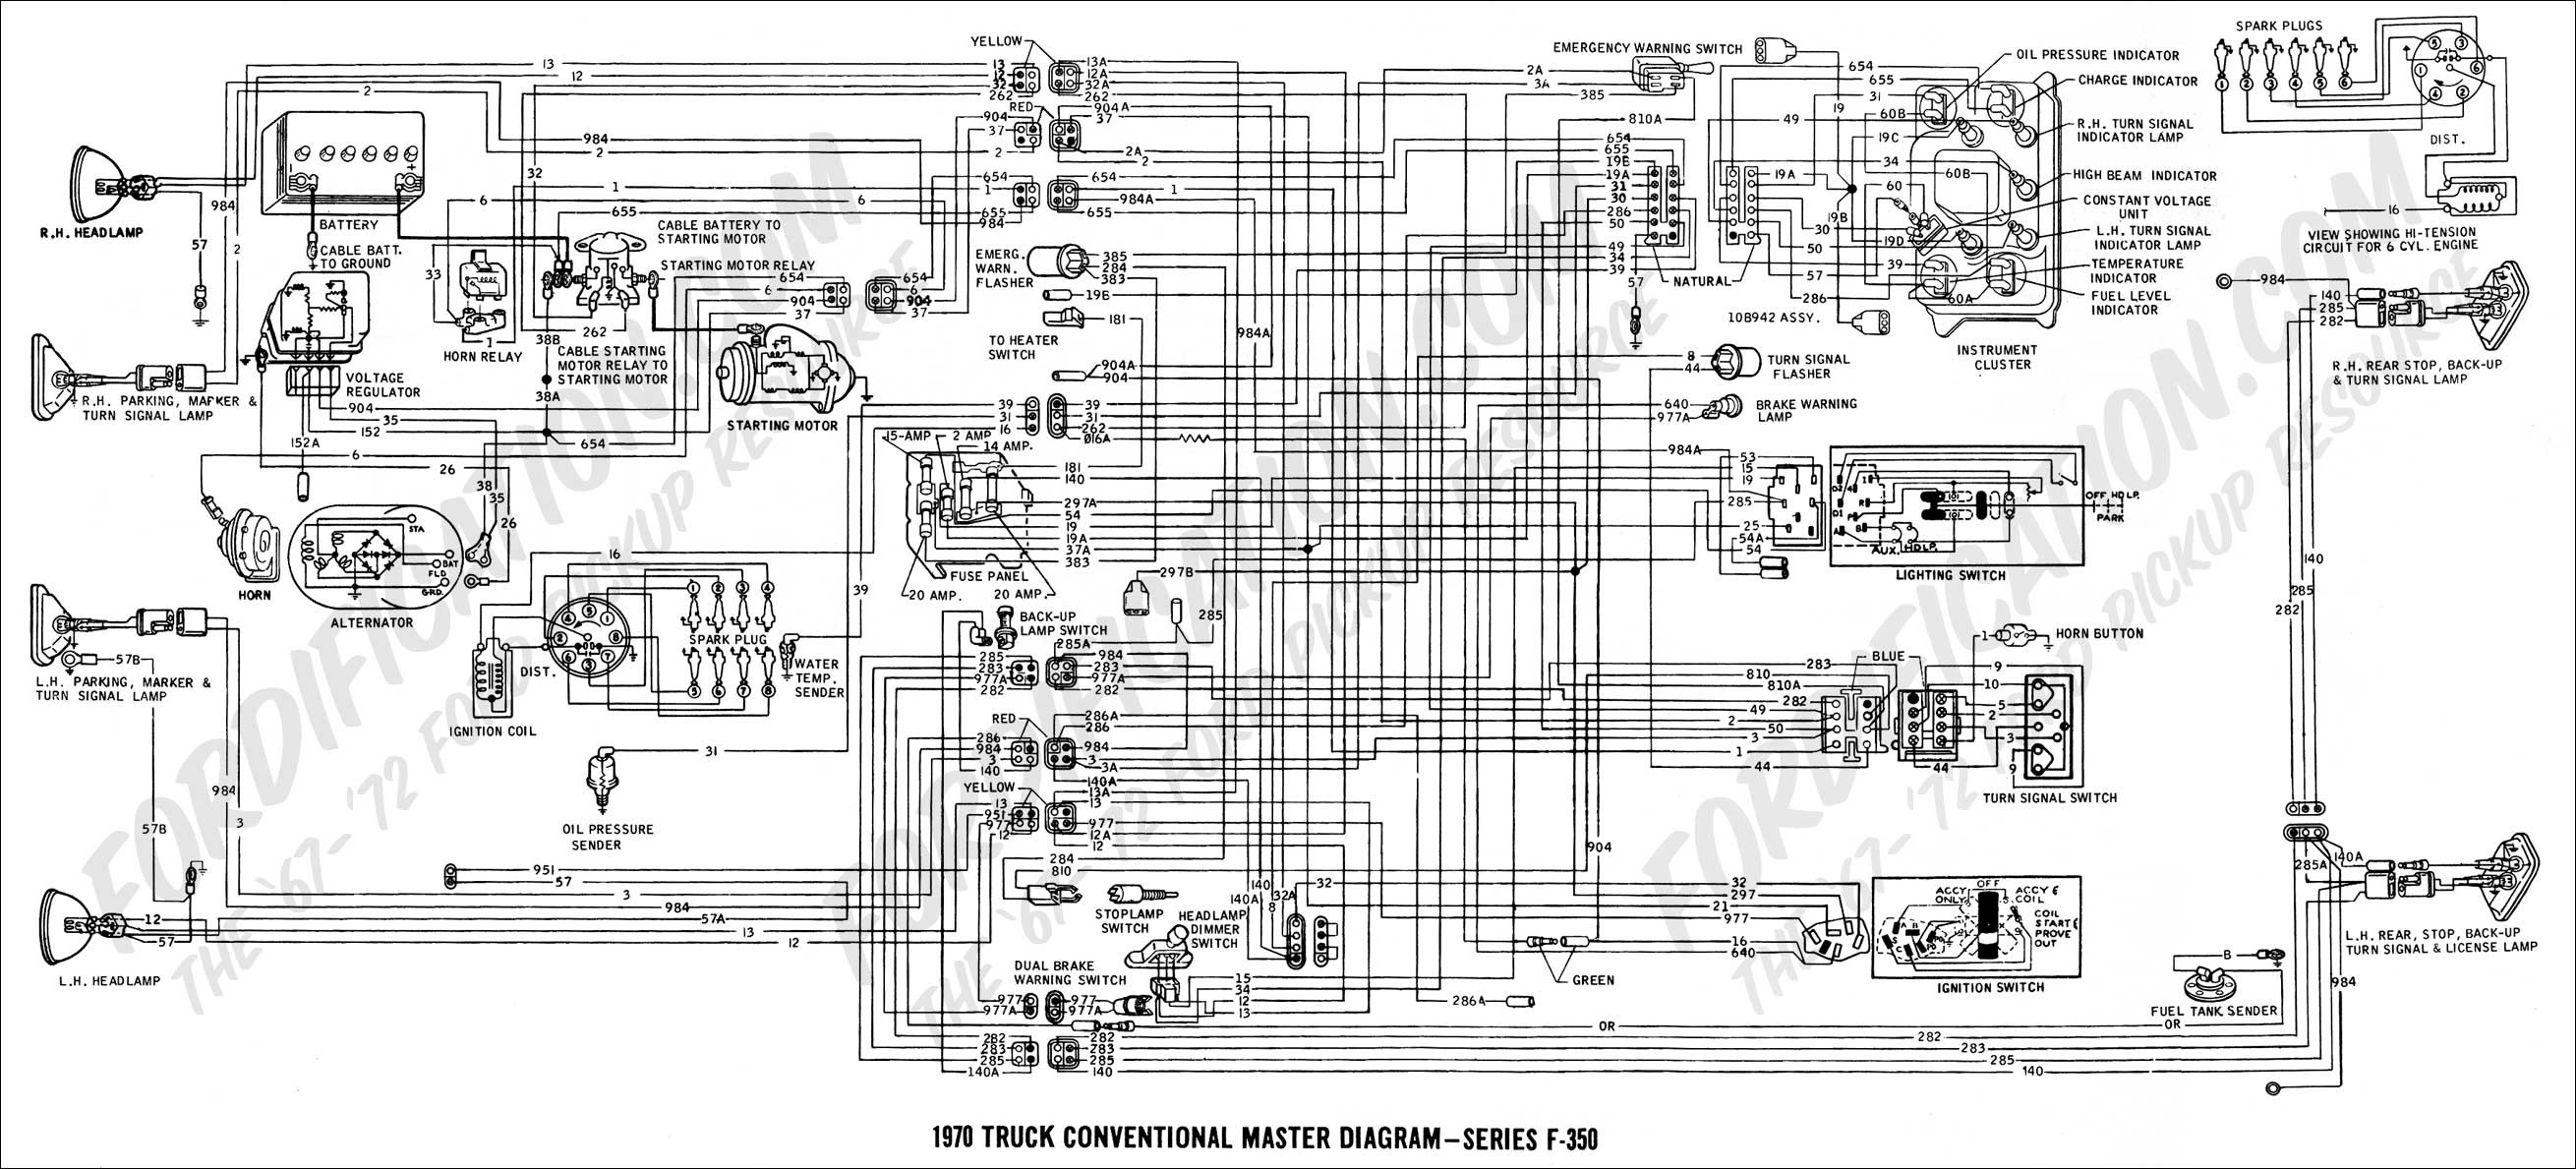 2006 Ford Expedition Trailer Wiring Diagram from detoxicrecenze.com